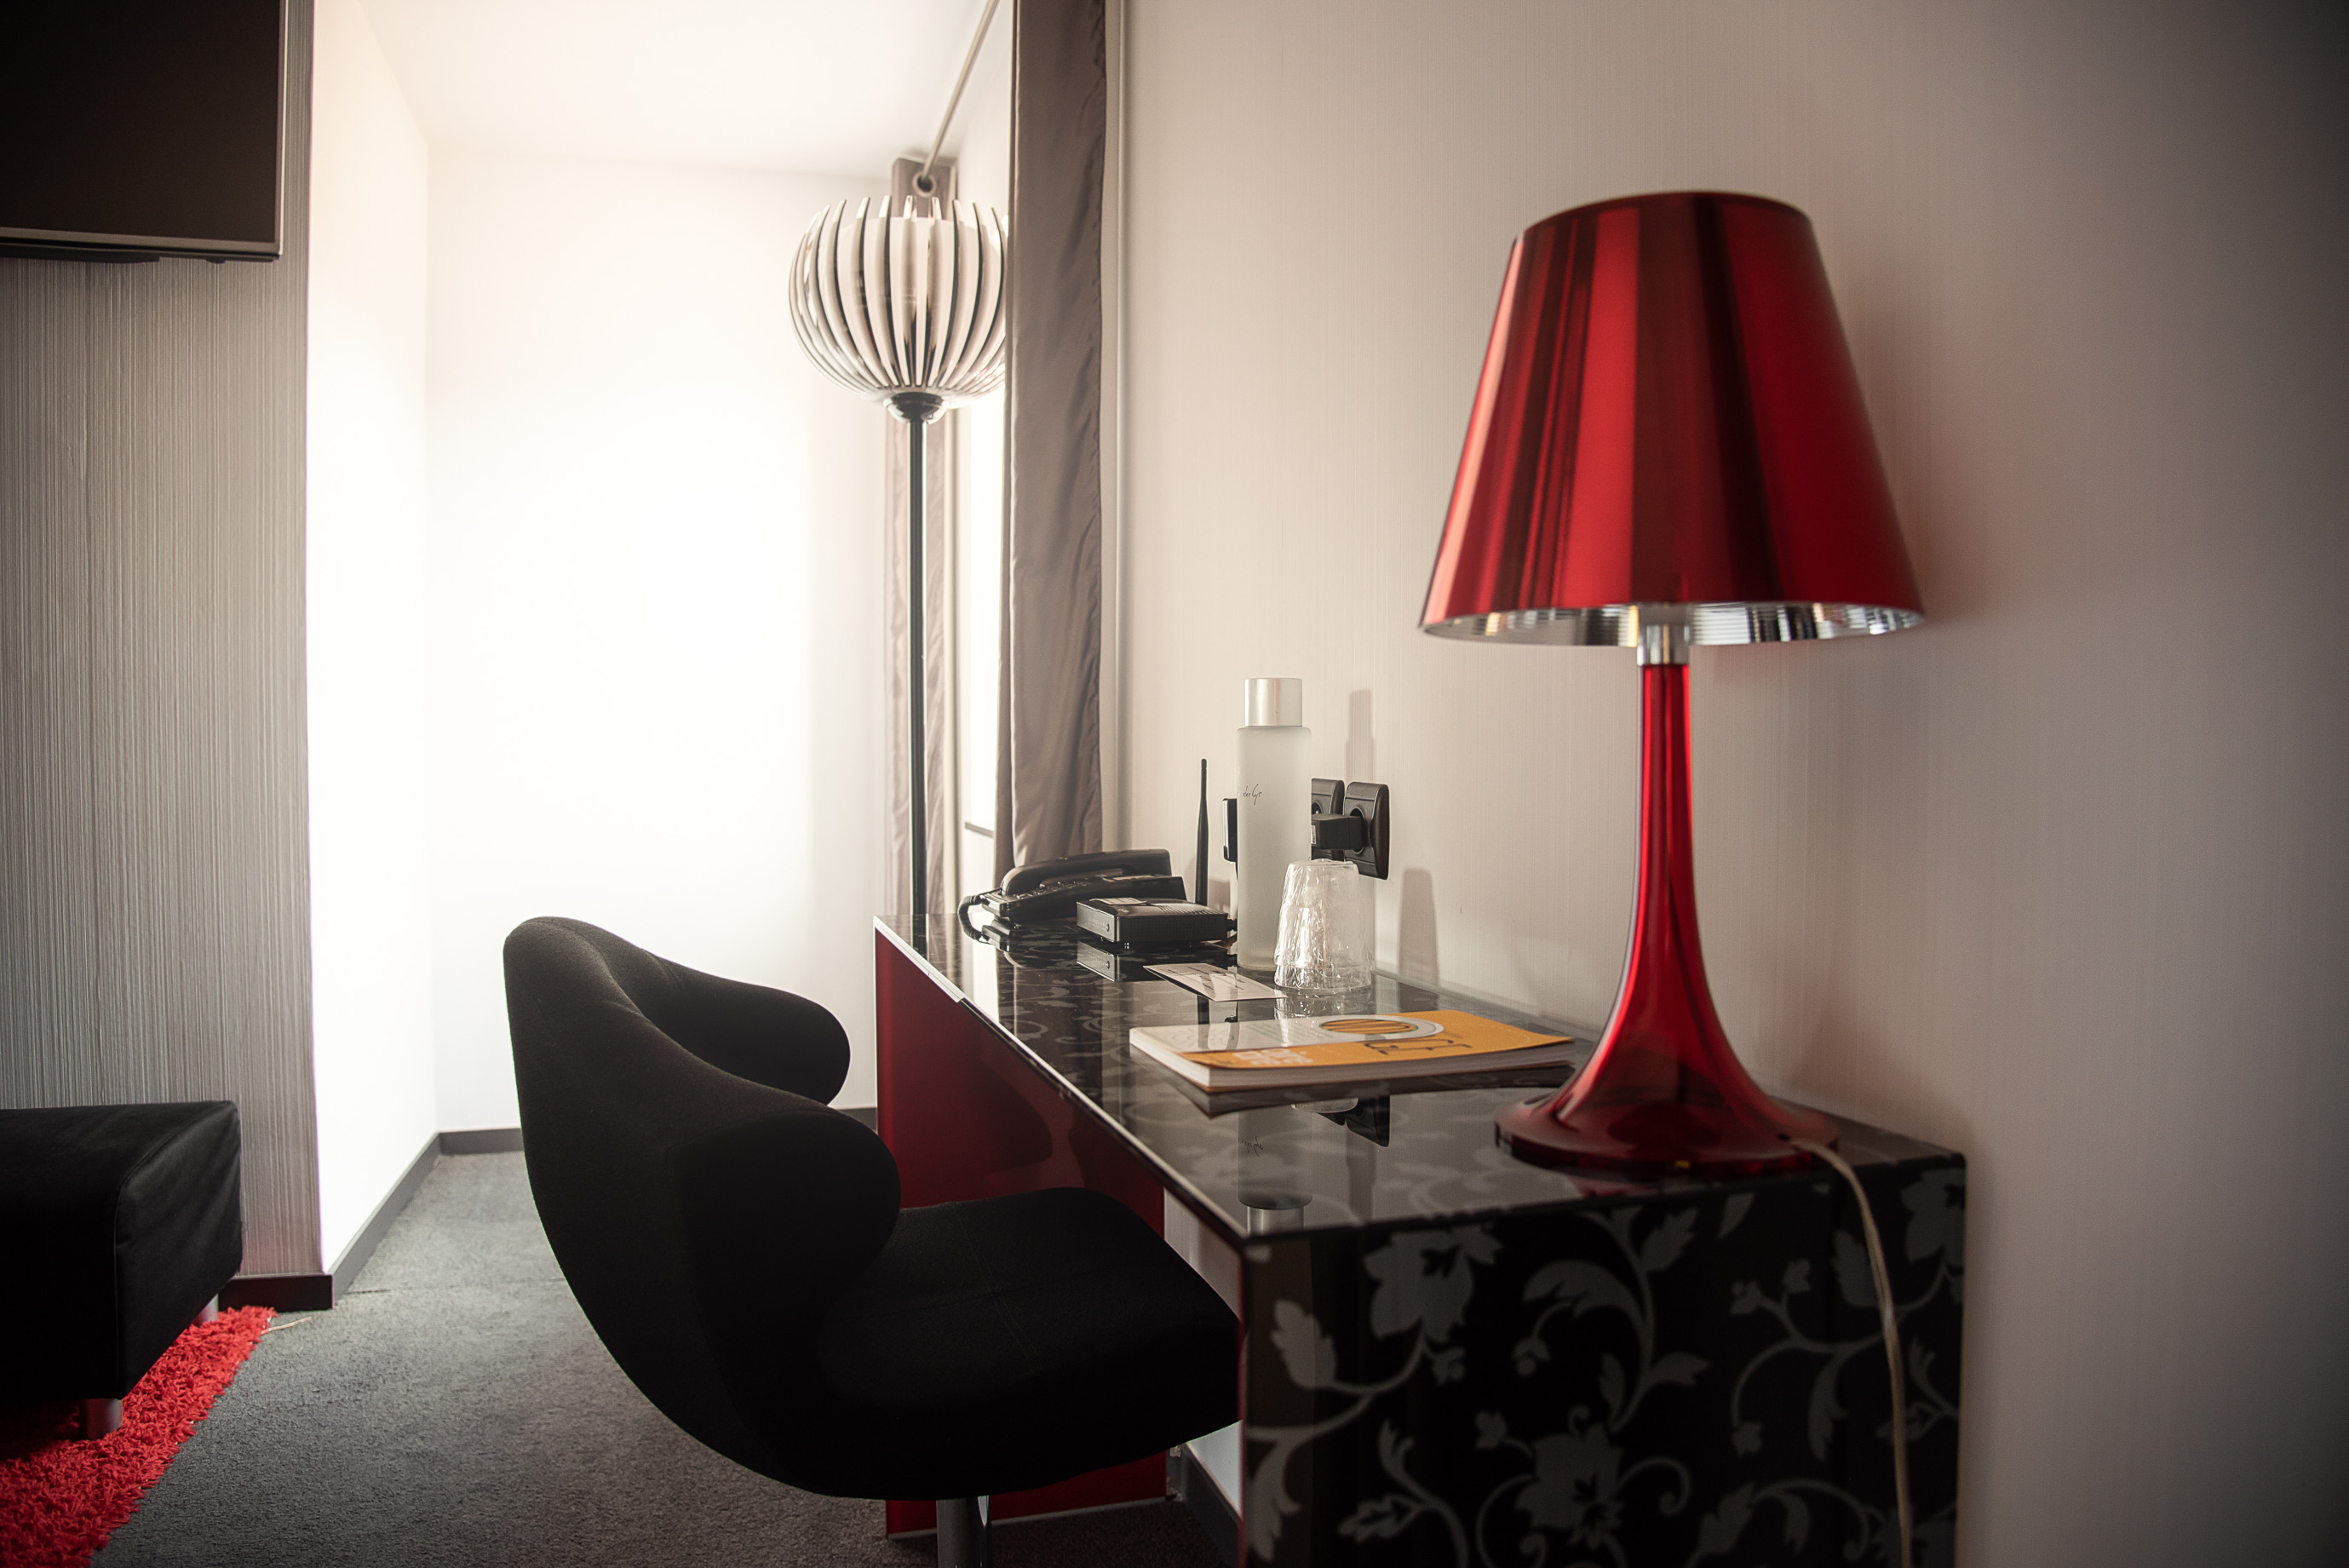 Study Area of a Room at Domaine des Lys Luxury Hotel in Ancenis Pays de la Loire